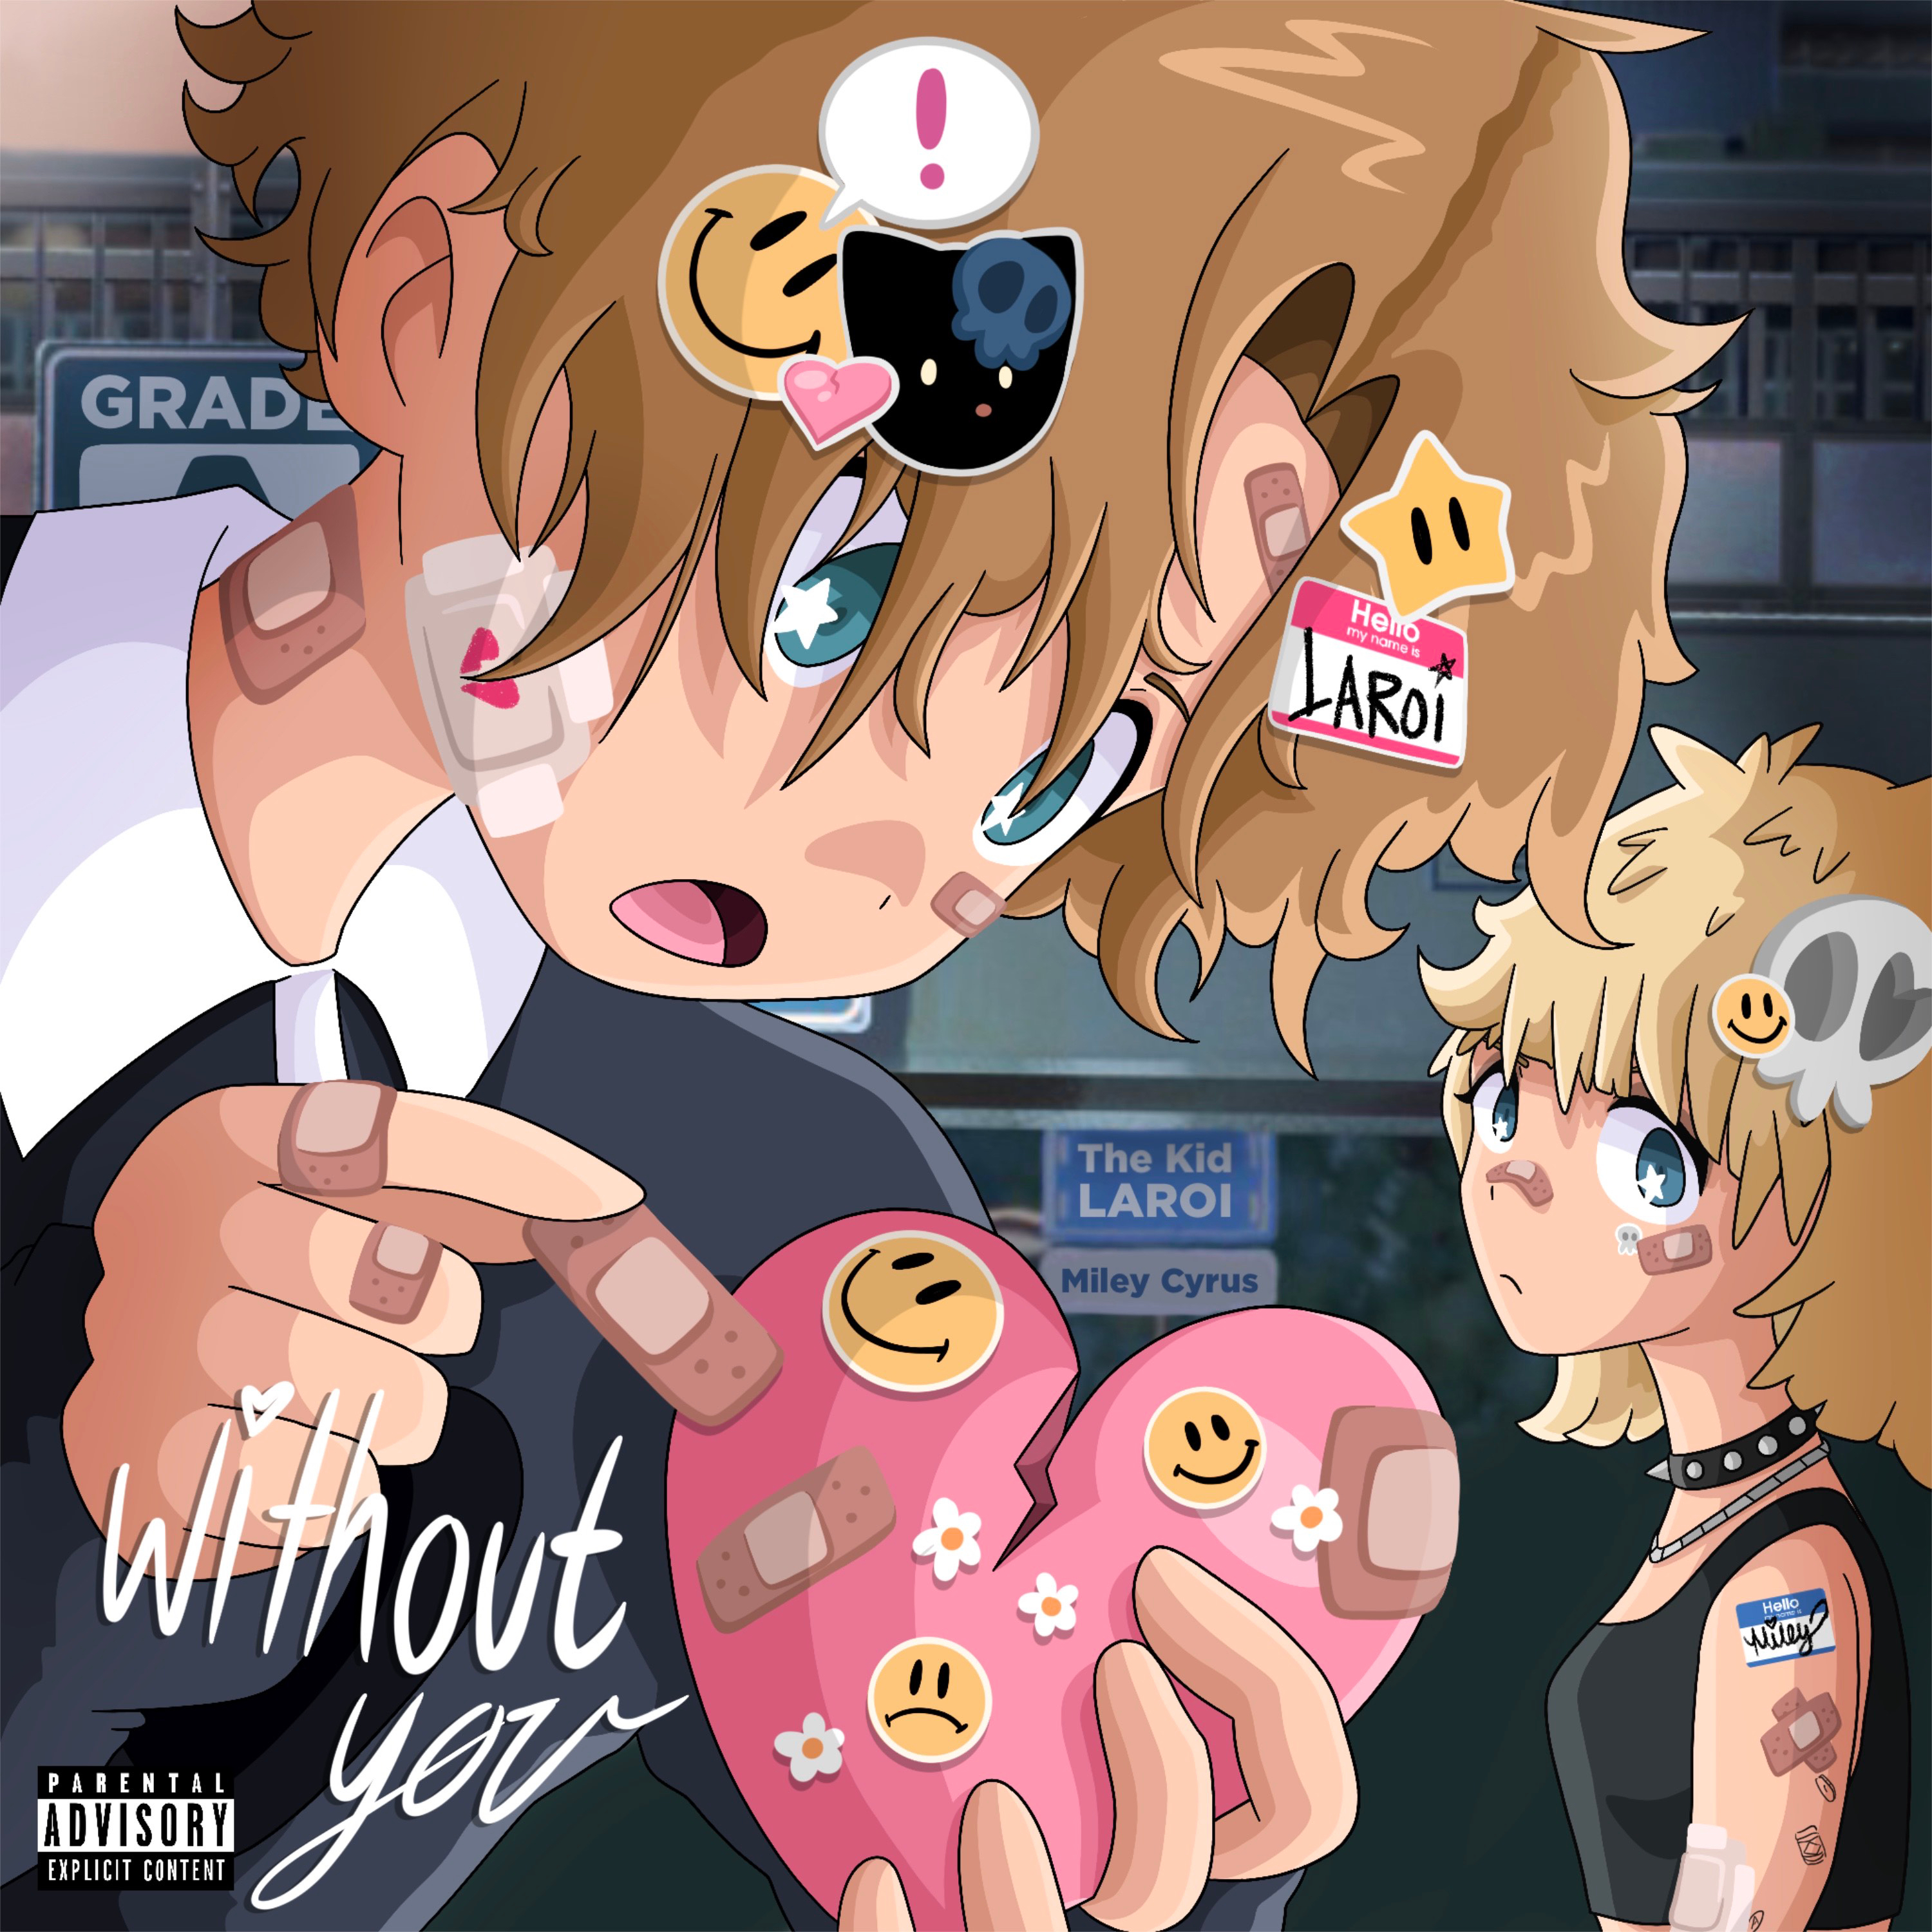 The Kid LAROI Spices Up “WITHOUT YOU” With Miley Cyrus